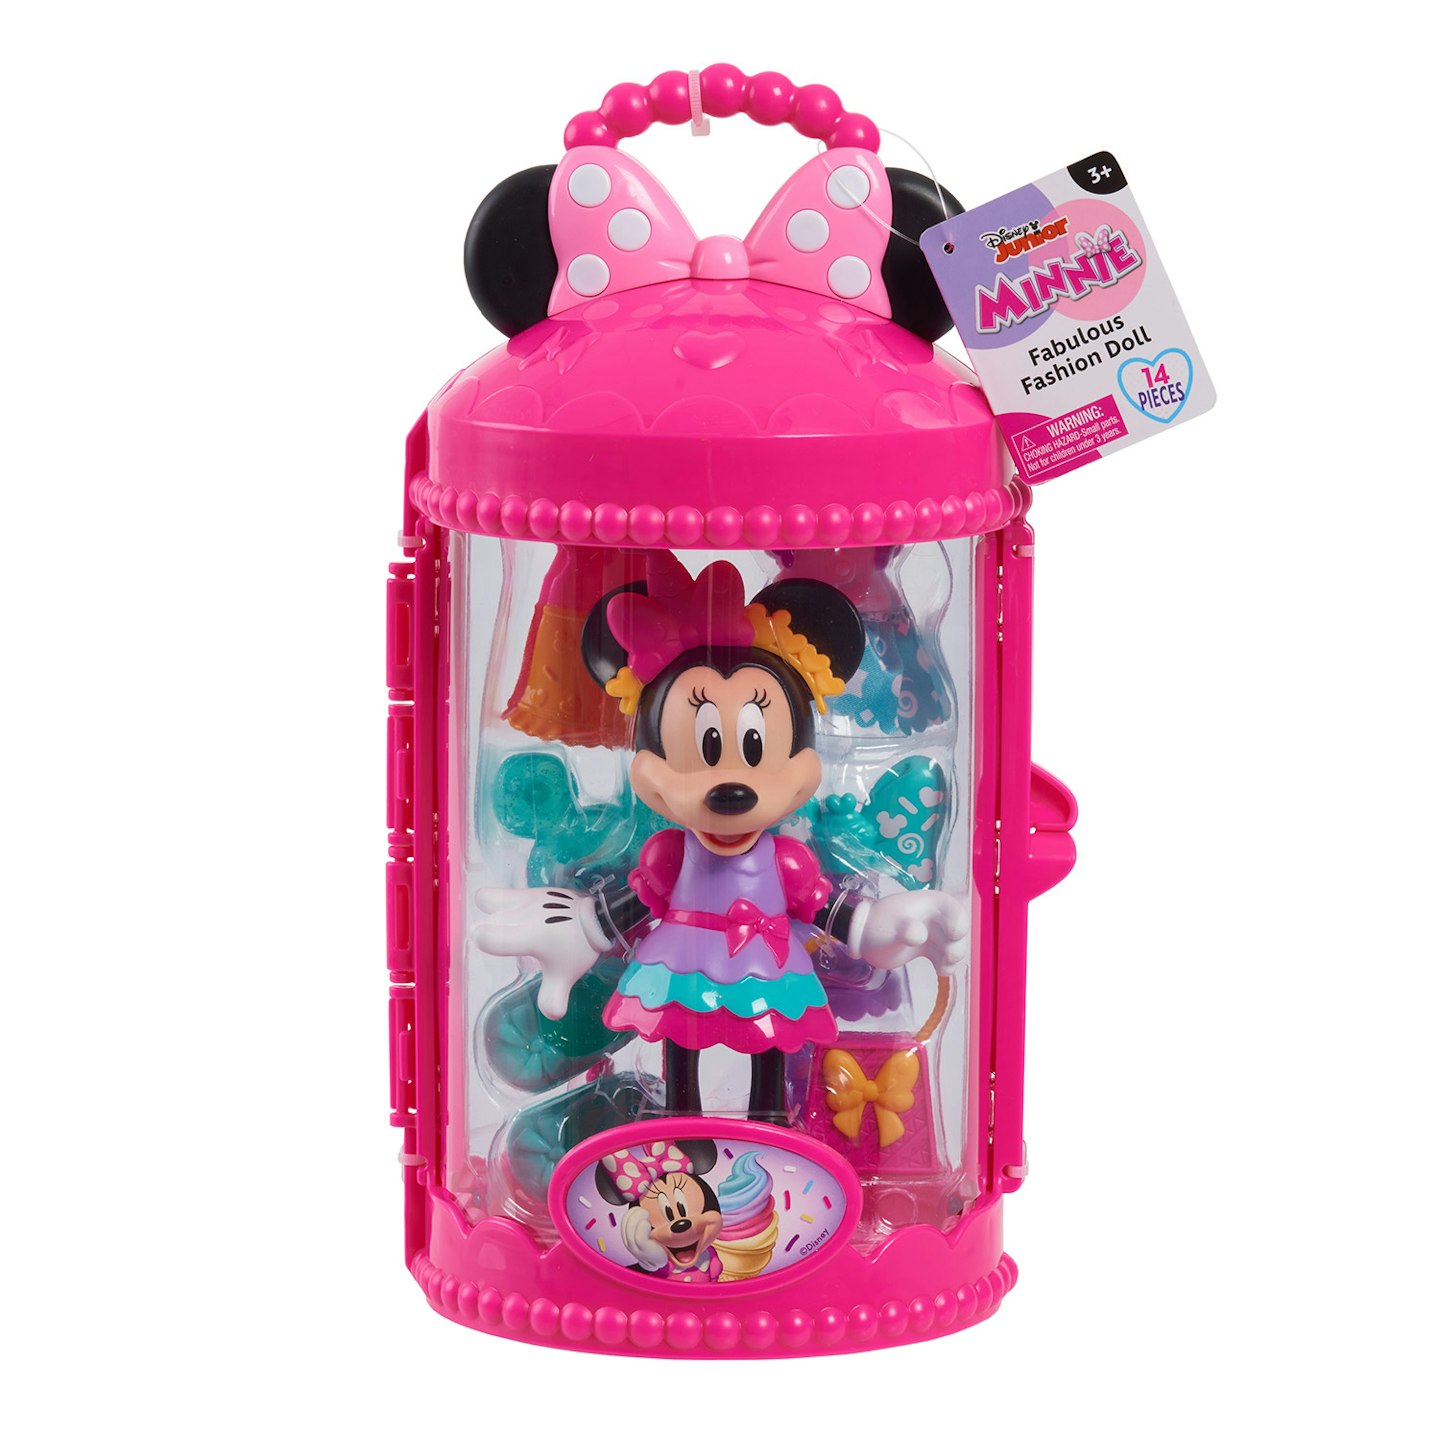 Disney Junior Minnie Mouse Fabulous Fashion Doll with Case Sweet Party 